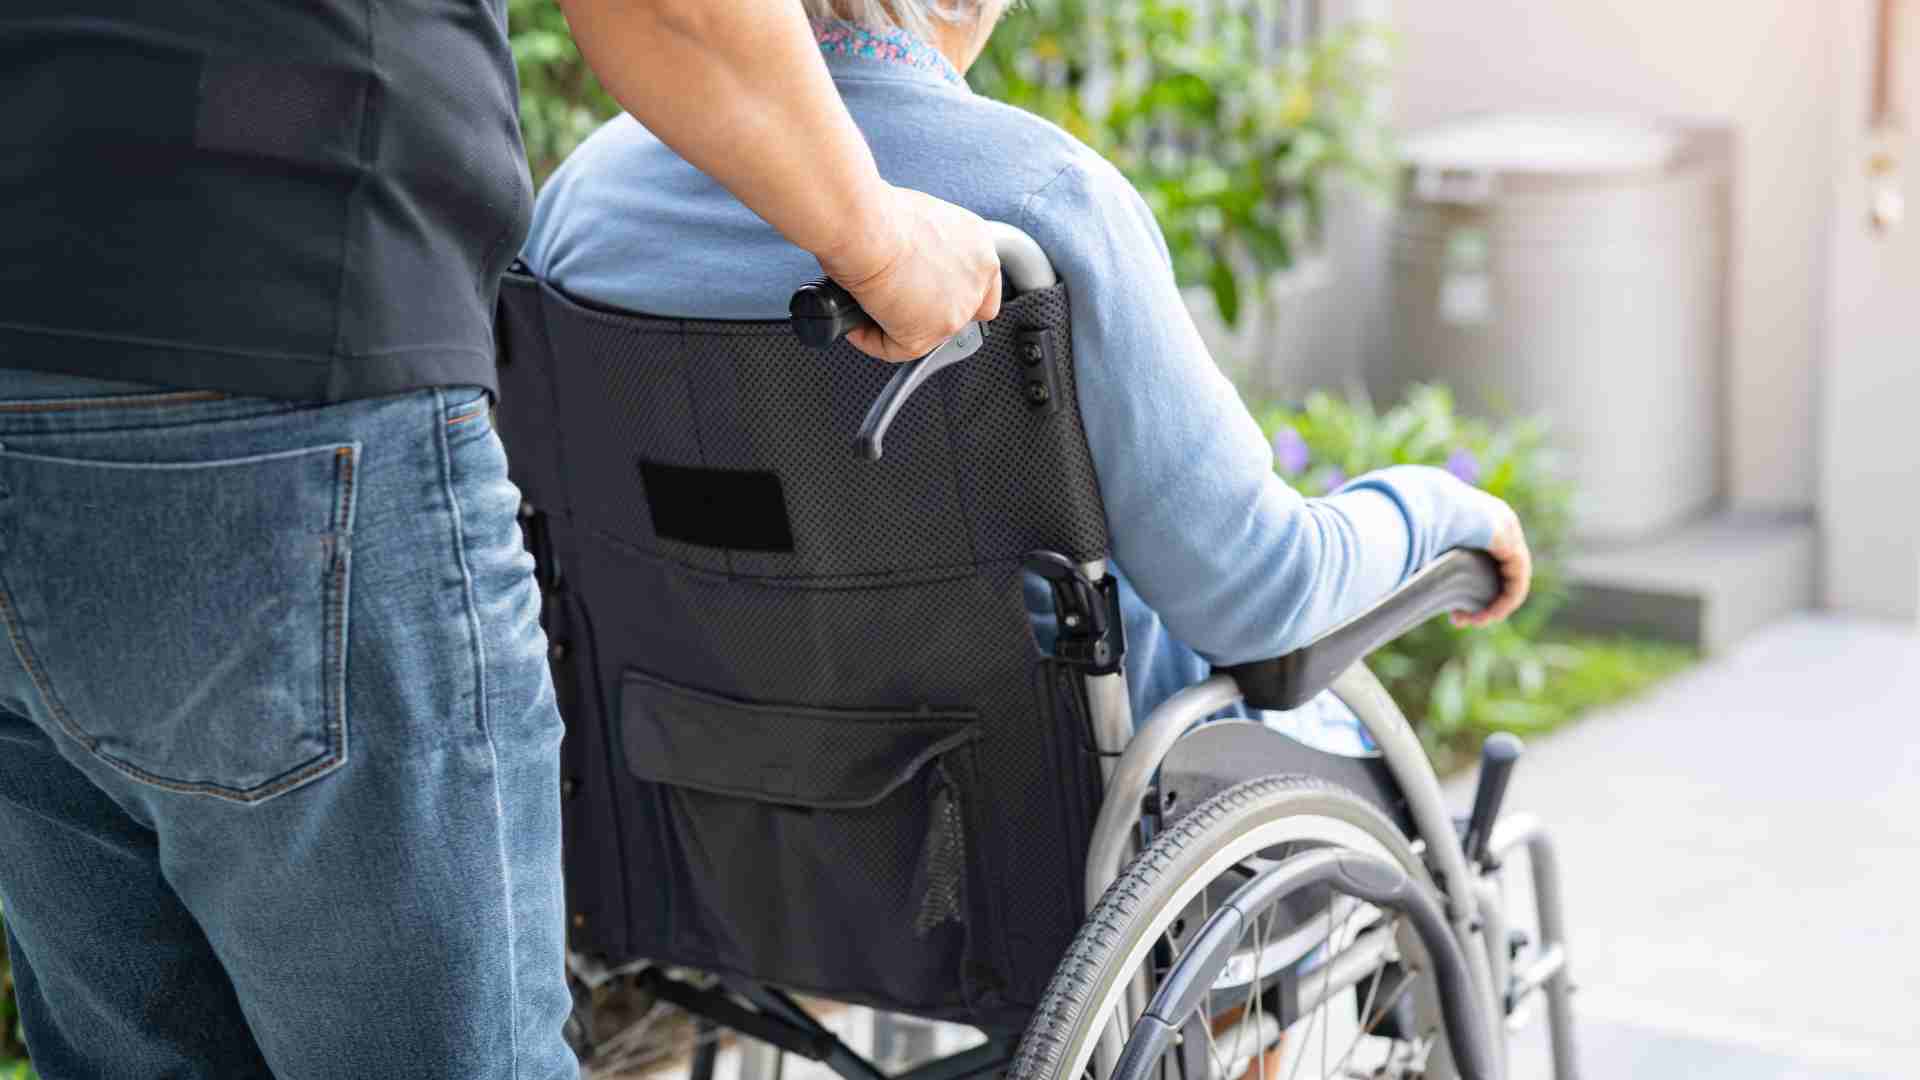 Seniors and people with a disability may be eligible for the next SSI payment